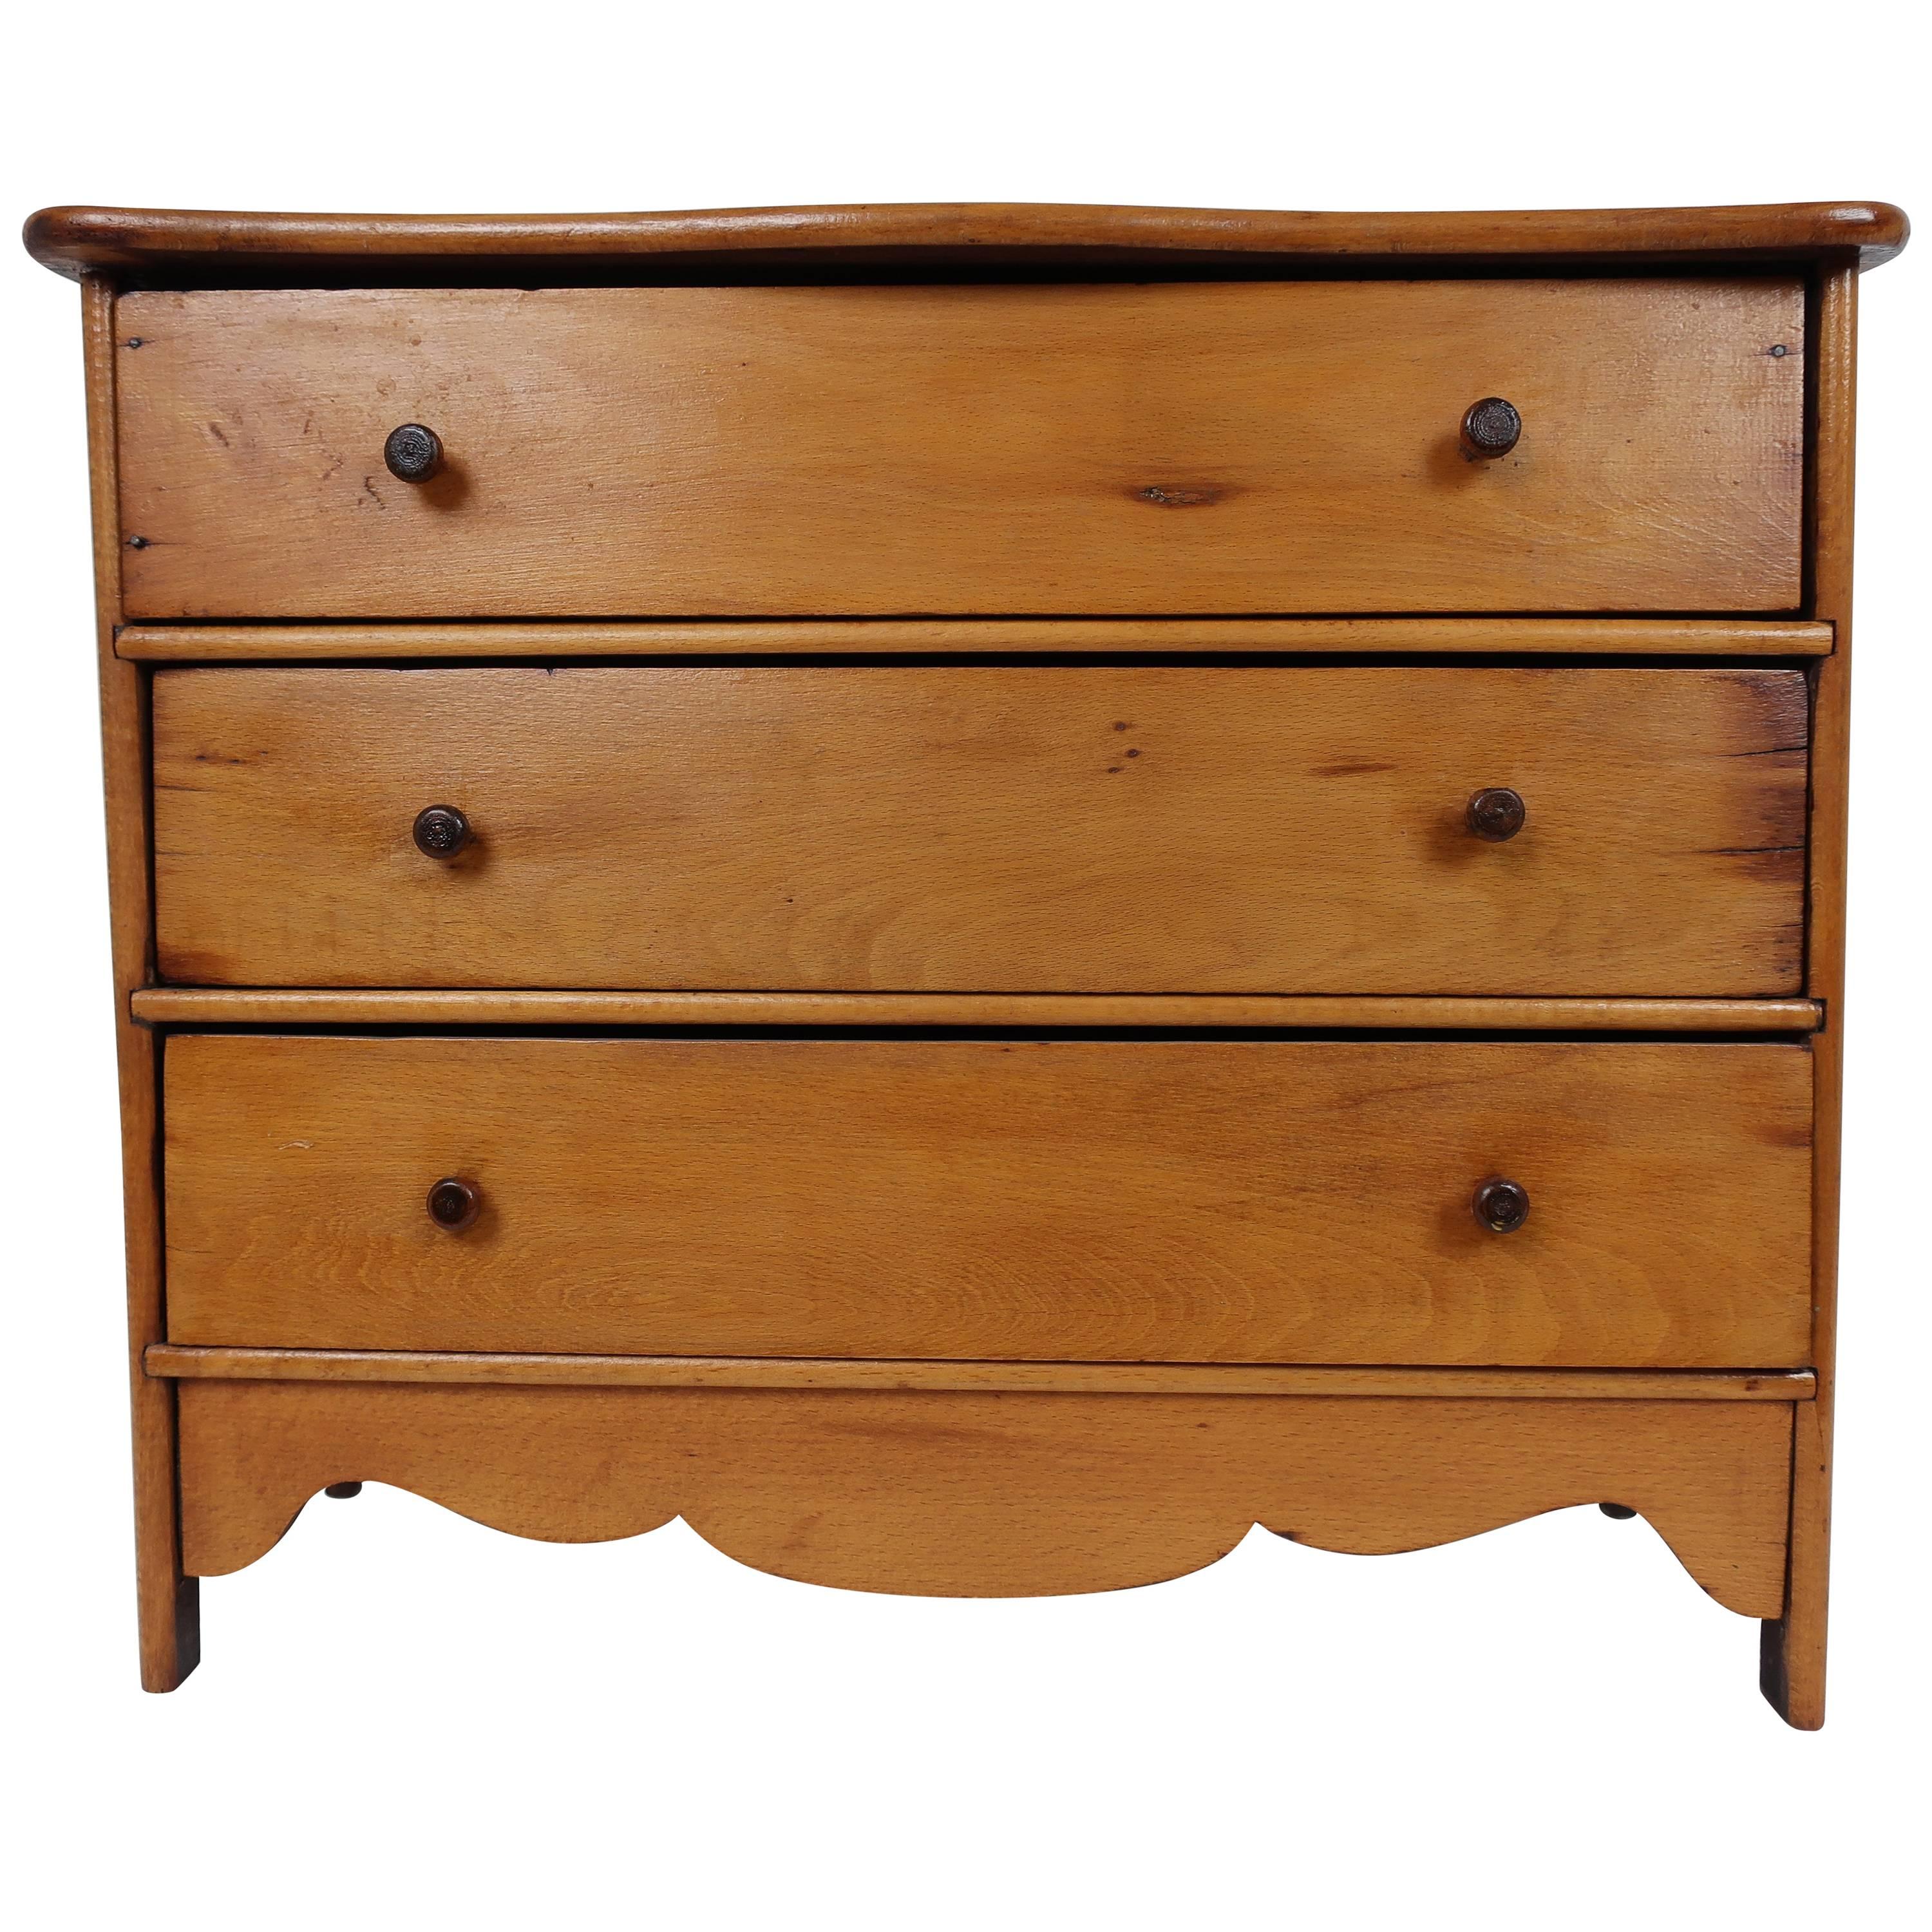 Early 19th Century American Miniature Pine Chest of Drawers